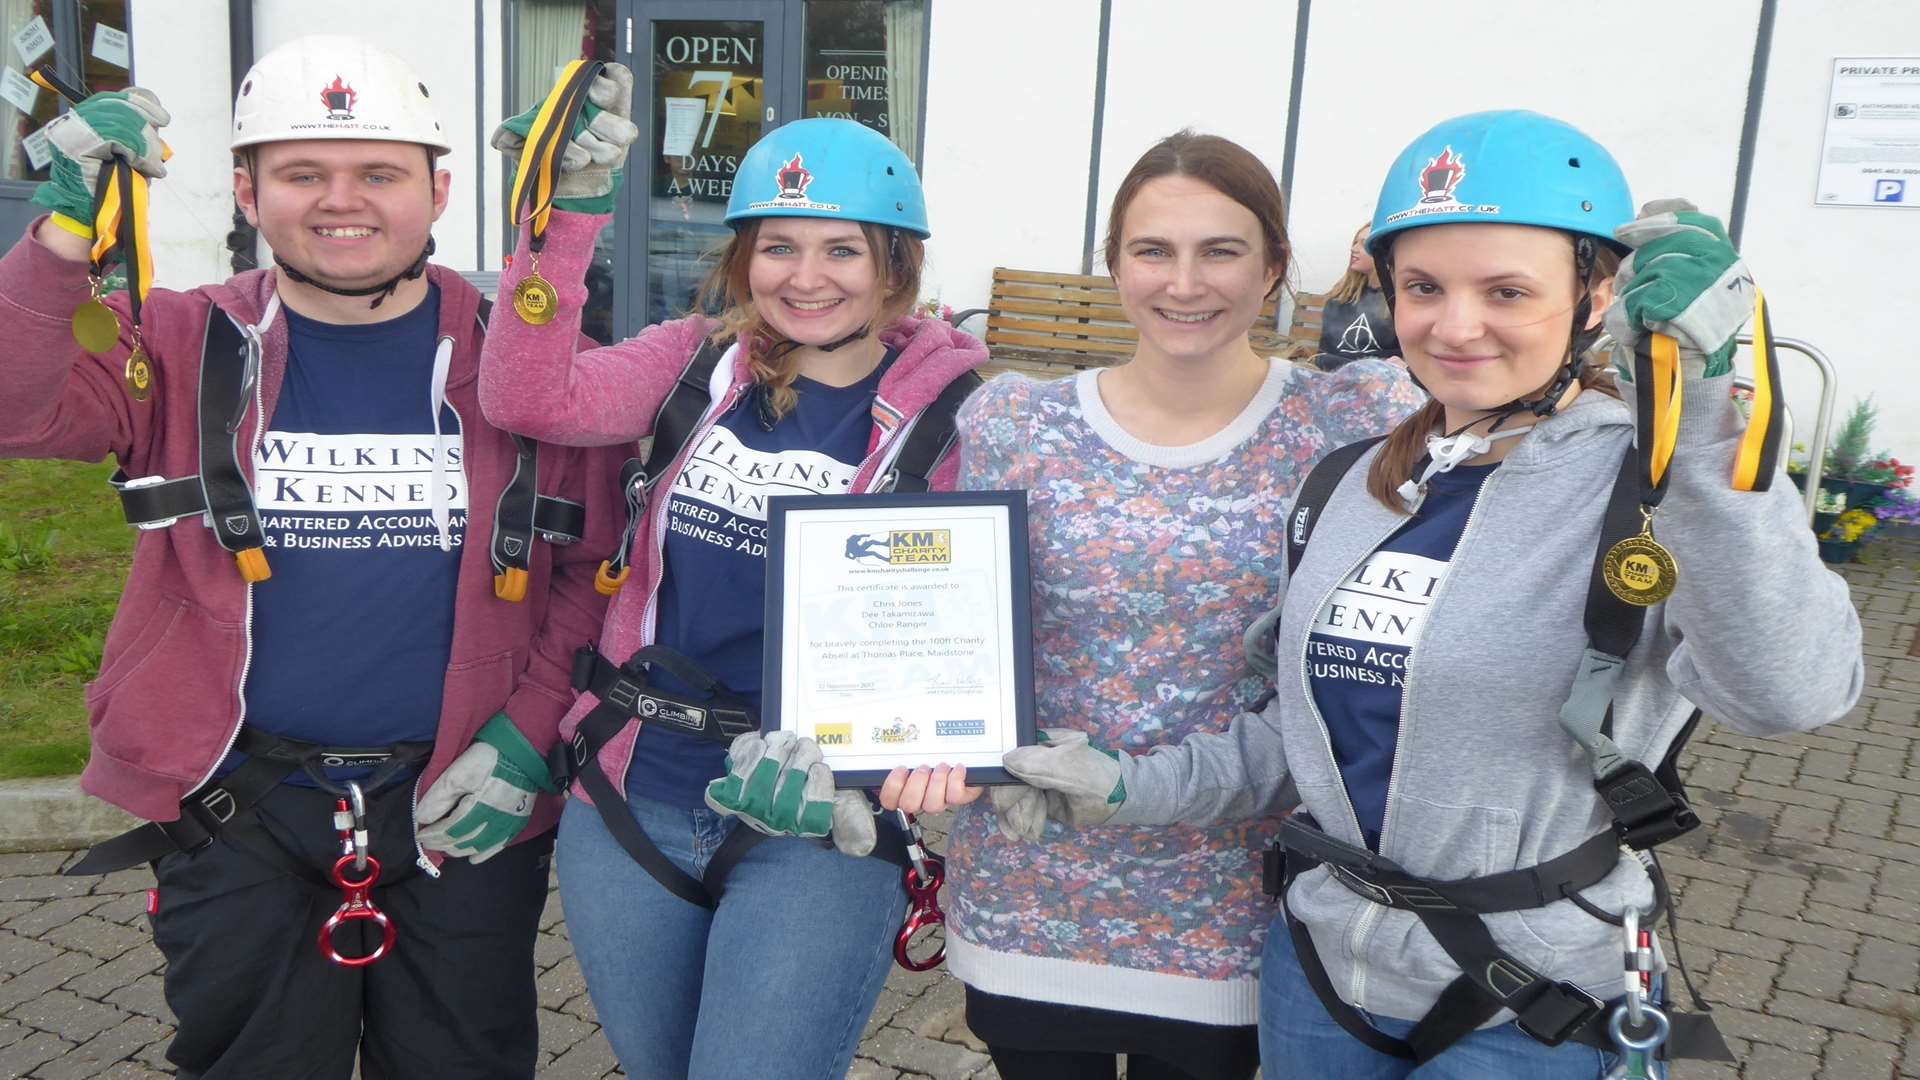 Alex Andrews (second right) from Wilkins Kennedy, key partner for the KM Abseil Charity Challenge, congratulates team mates Chris Jones, Chloe Ranger and Dee Takamizawa for completing the challenge.